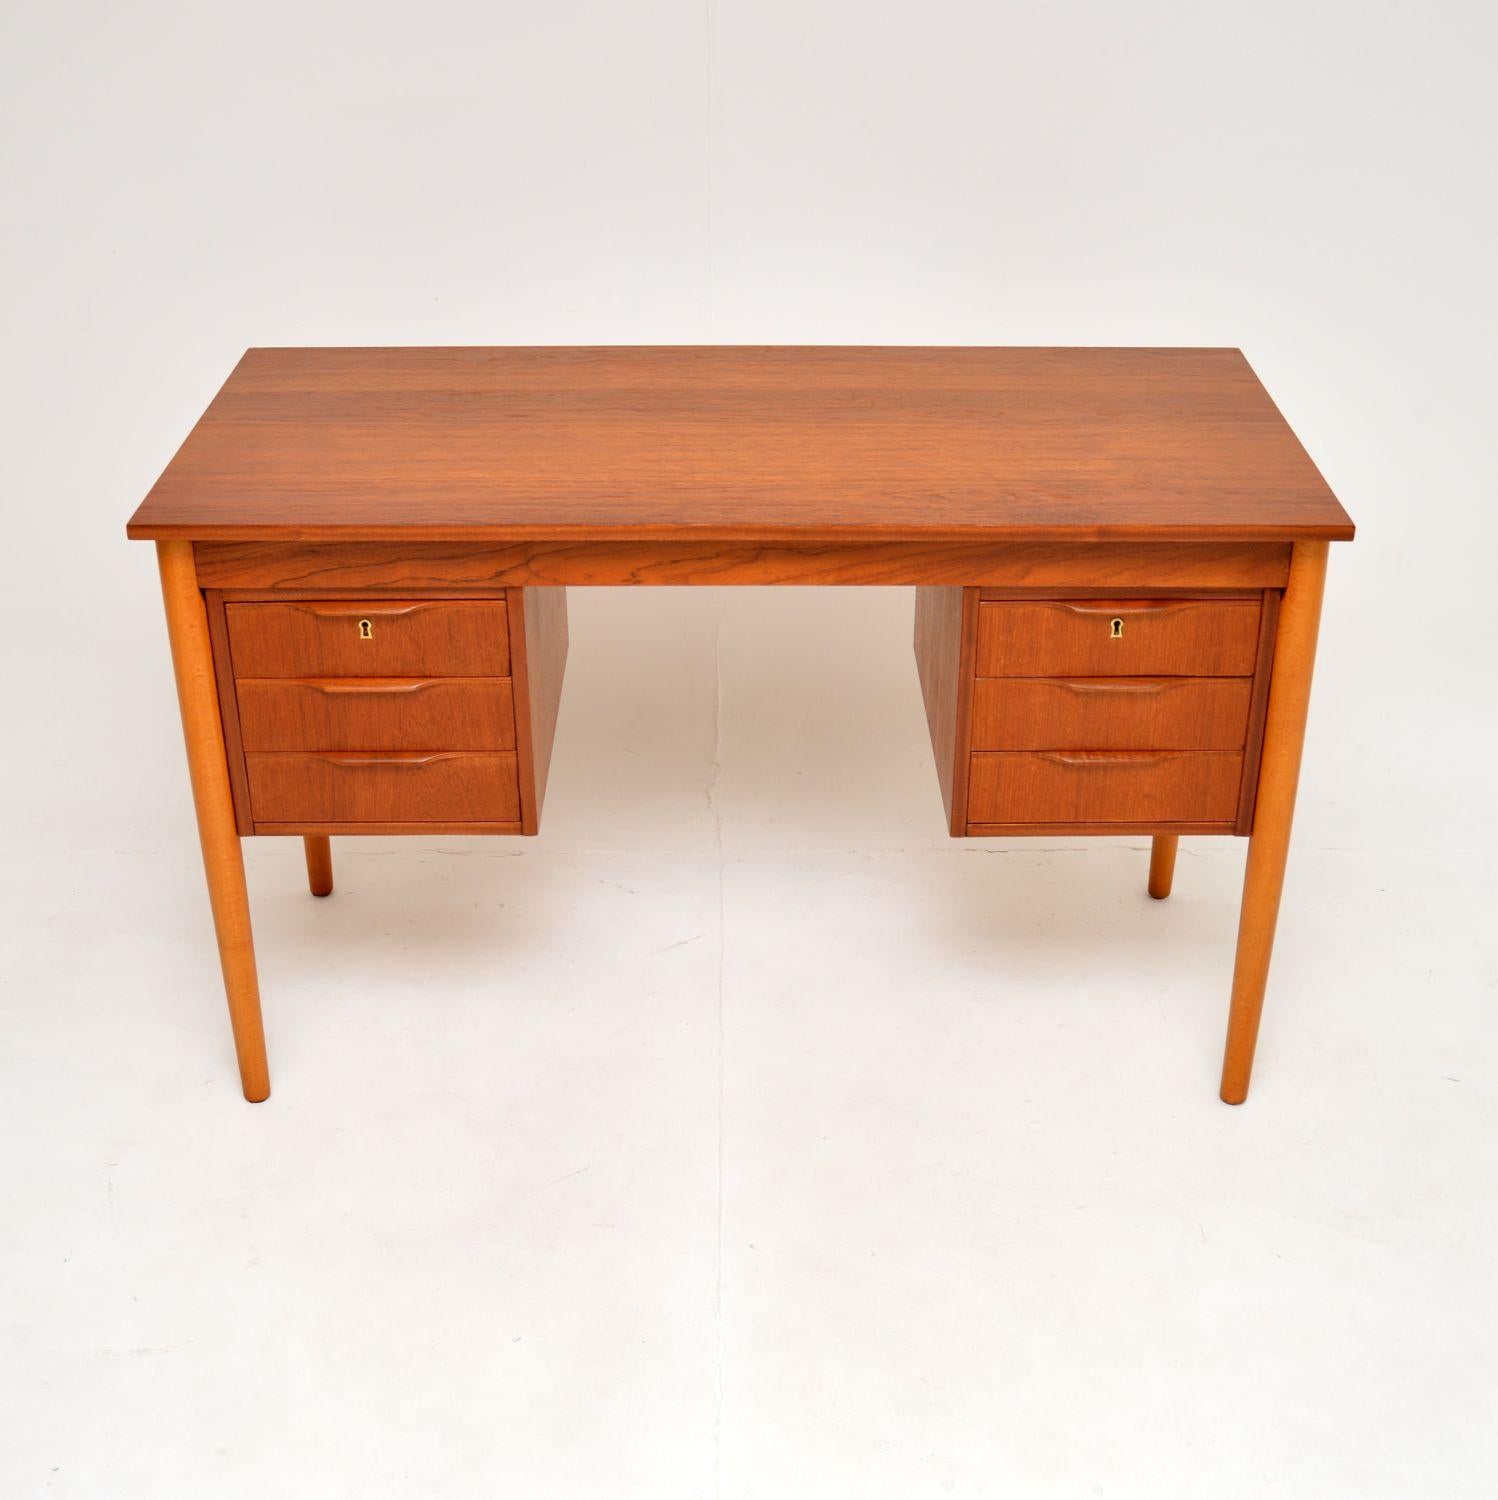 A stylish and useful Danish vintage teak pedestal desk. This was made in Denmark, it dates from the 1960’s.

It is of great quality and is beautifully designed. This has a nicely finished back so can be used as a free standing item, the three